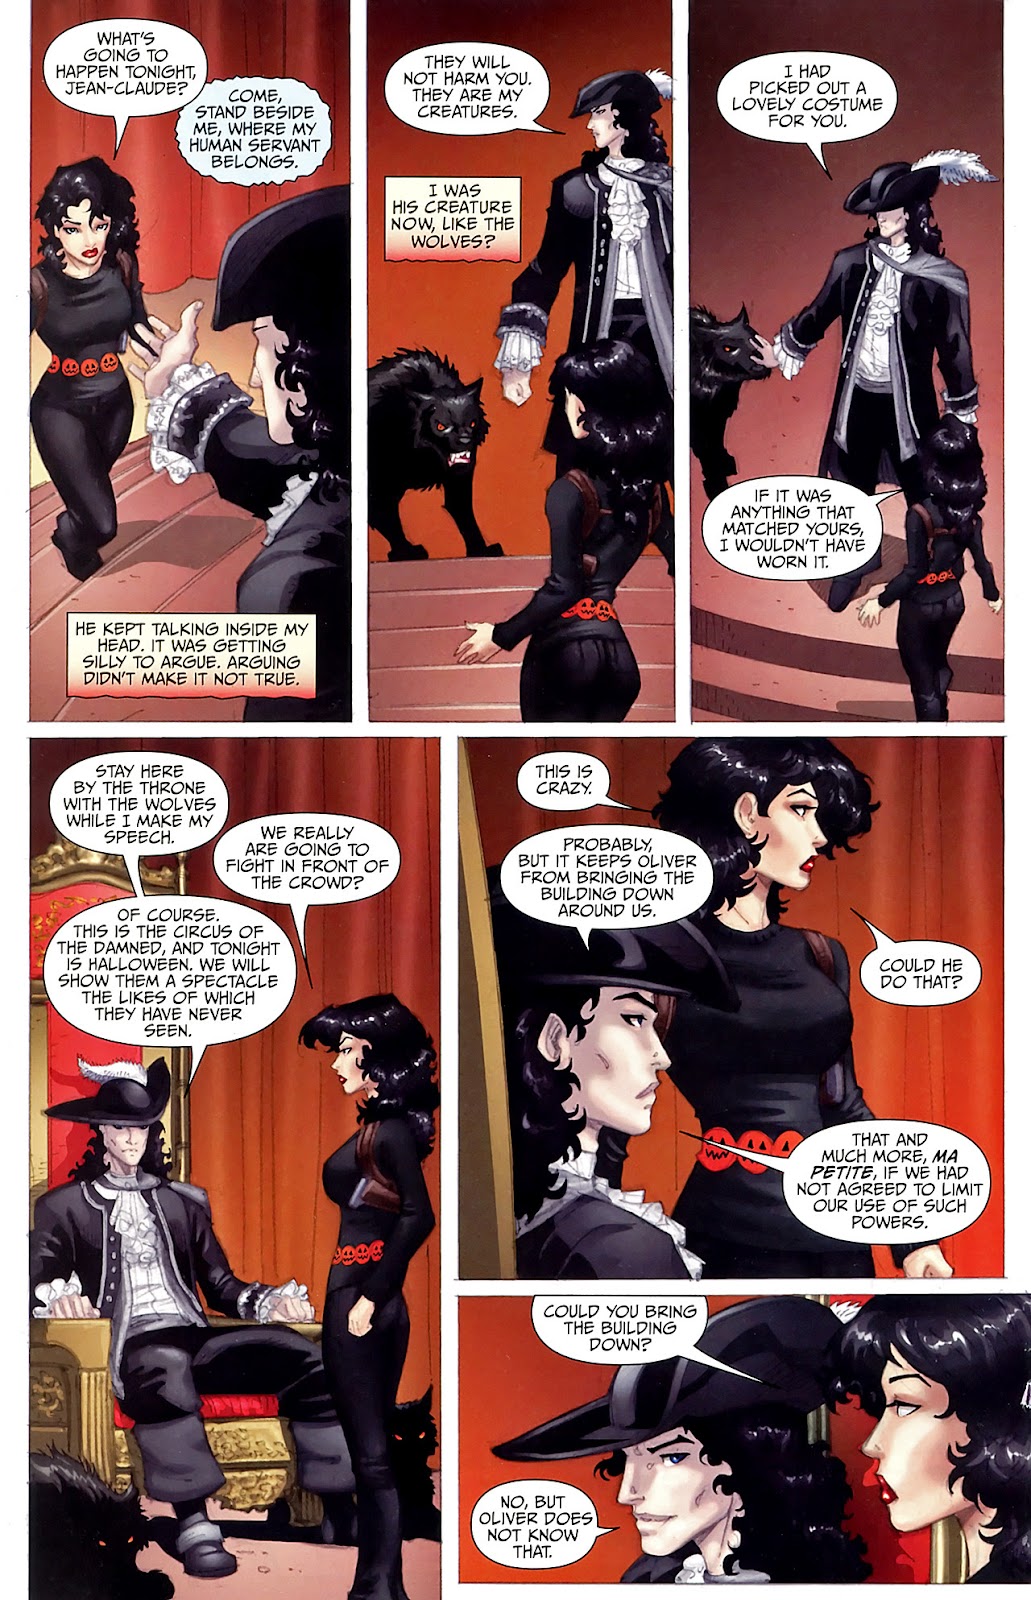 Anita Blake, Vampire Hunter: Circus of the Damned - The Scoundrel issue 4 - Page 13